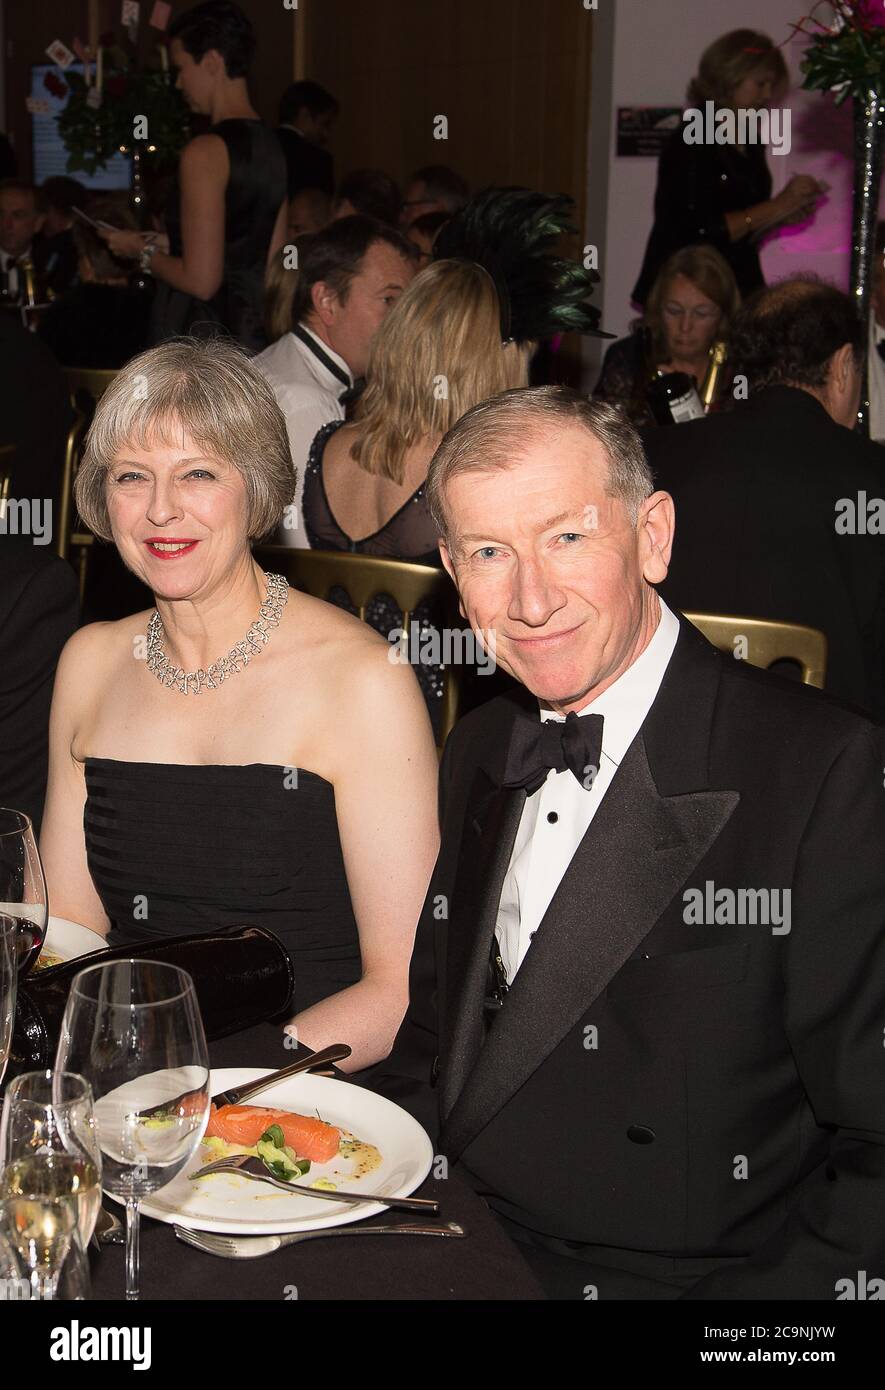 Cookham, Berkshire, UK.  21st November, 2015. Theresa May MP and husband Philip May attend the Cookham Ball at the Odney Club. Credit: Maureen McLean/Alamy Stock Photo